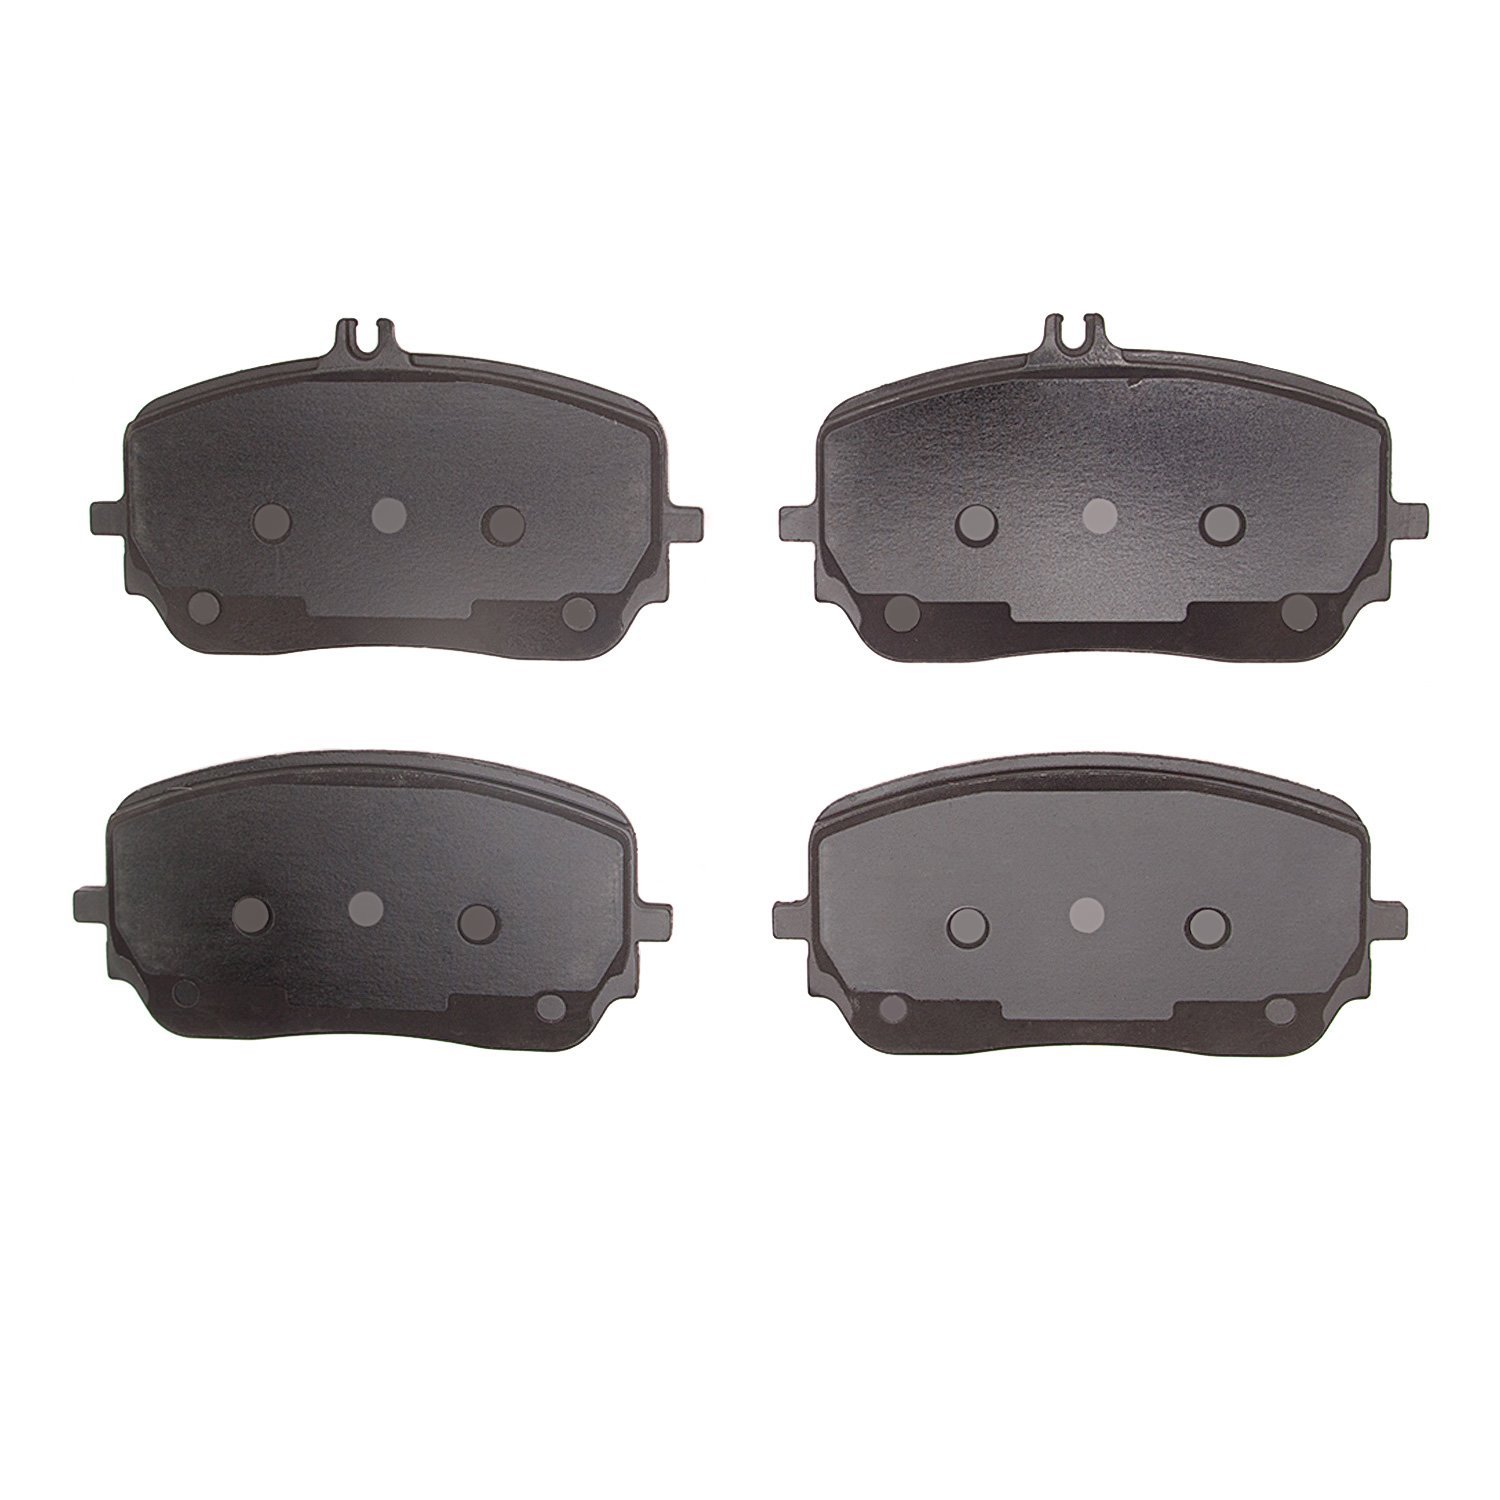 1551-2237-00 5000 Advanced Ceramic Brake Pads, Fits Select Mercedes-Benz, Position: Front